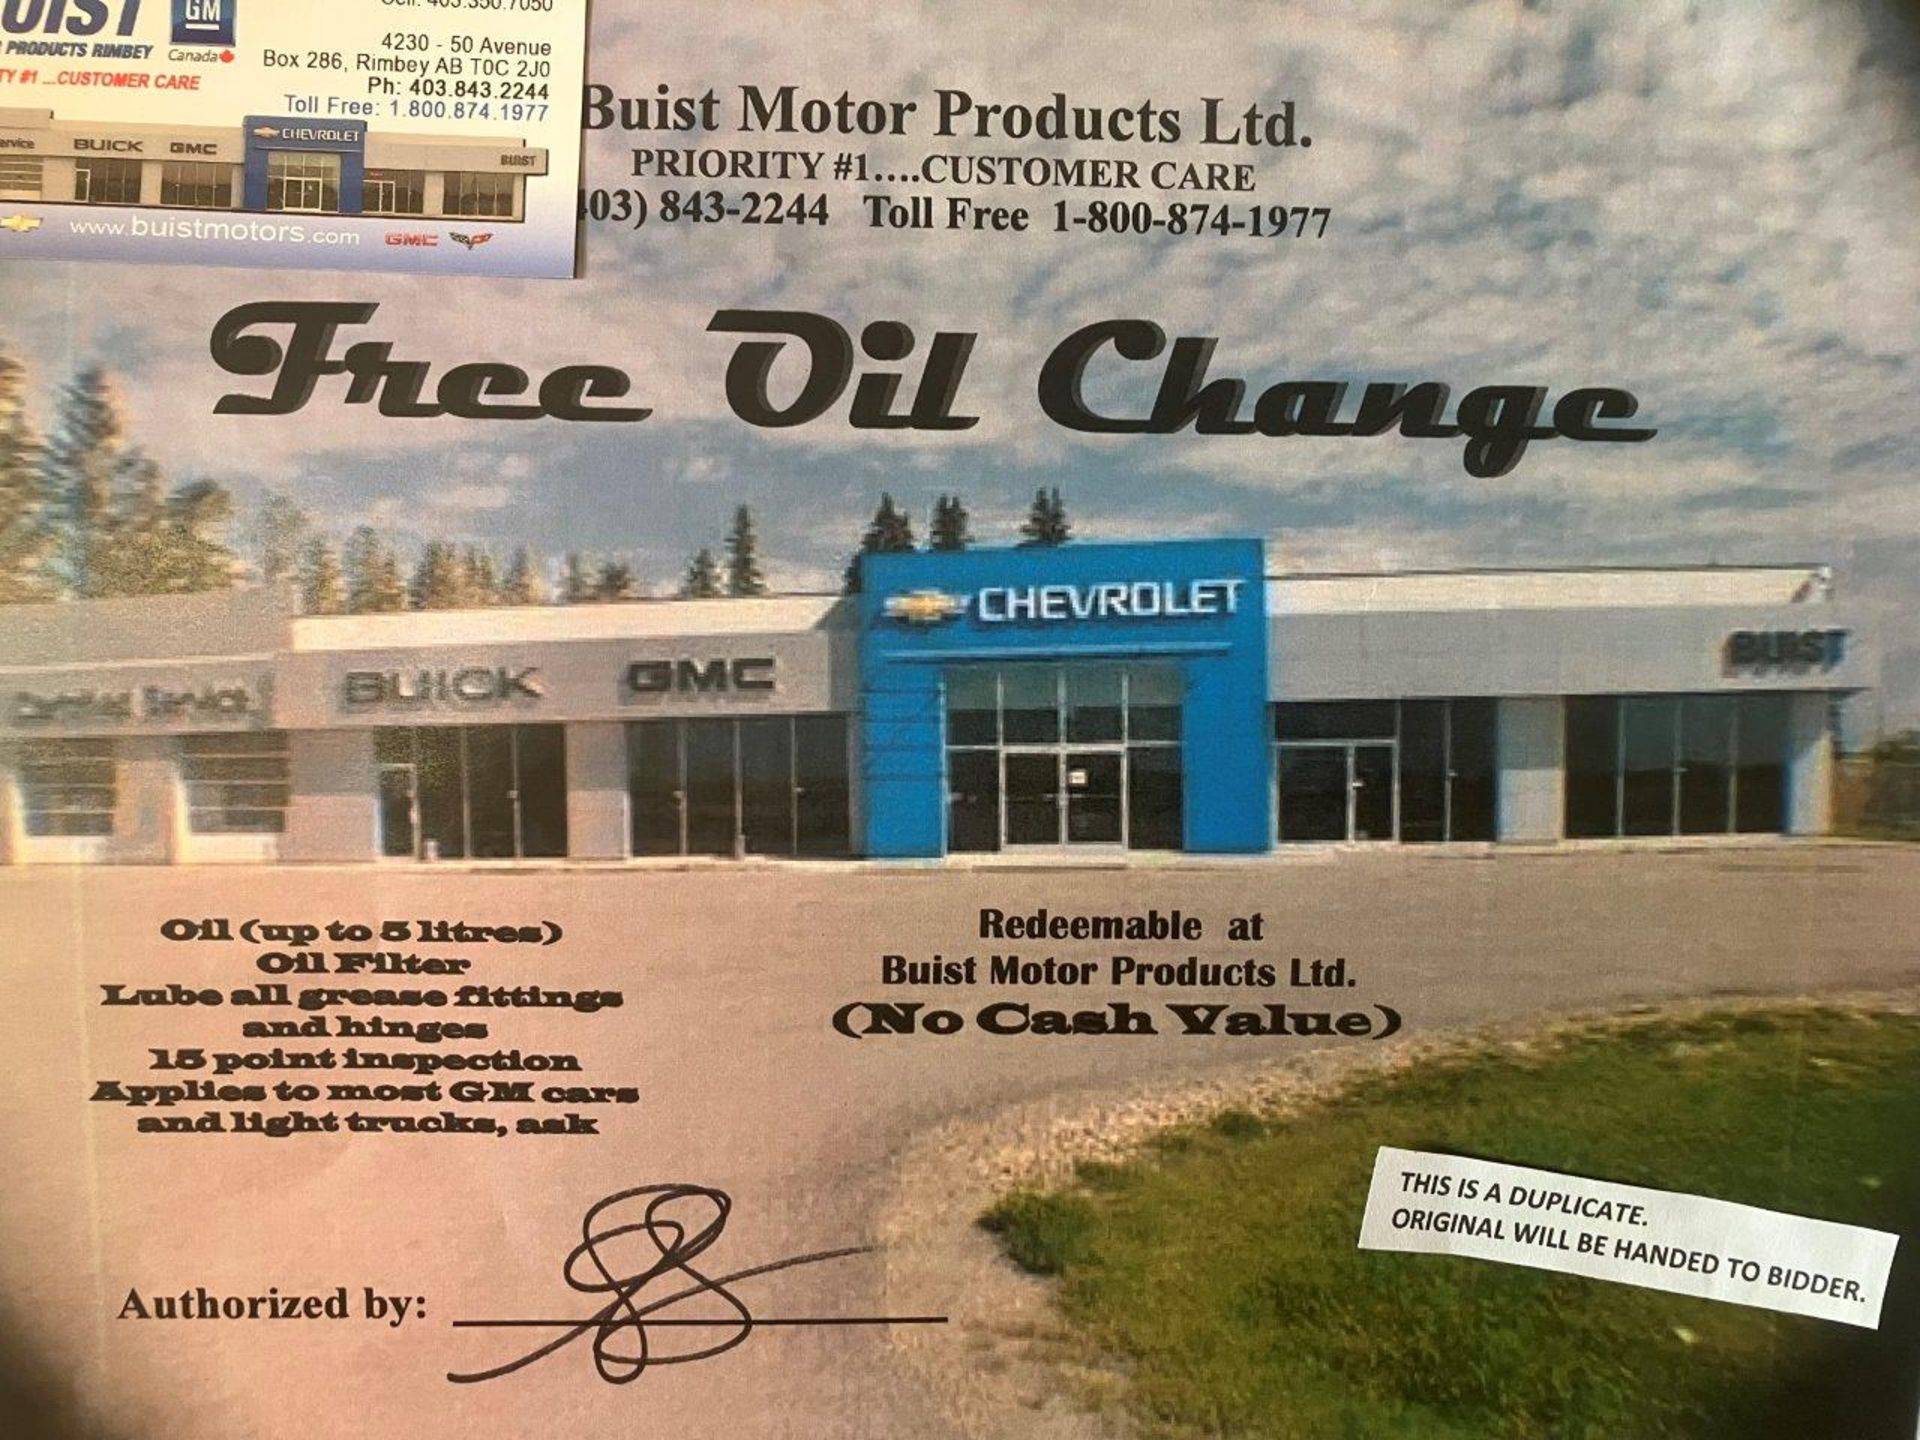 BUIST MOTOR PRODUCTS OIL CHANGE GIFT CERTIFICATE, TRAVEL MUG & BASEBALL CAP - Image 3 of 3